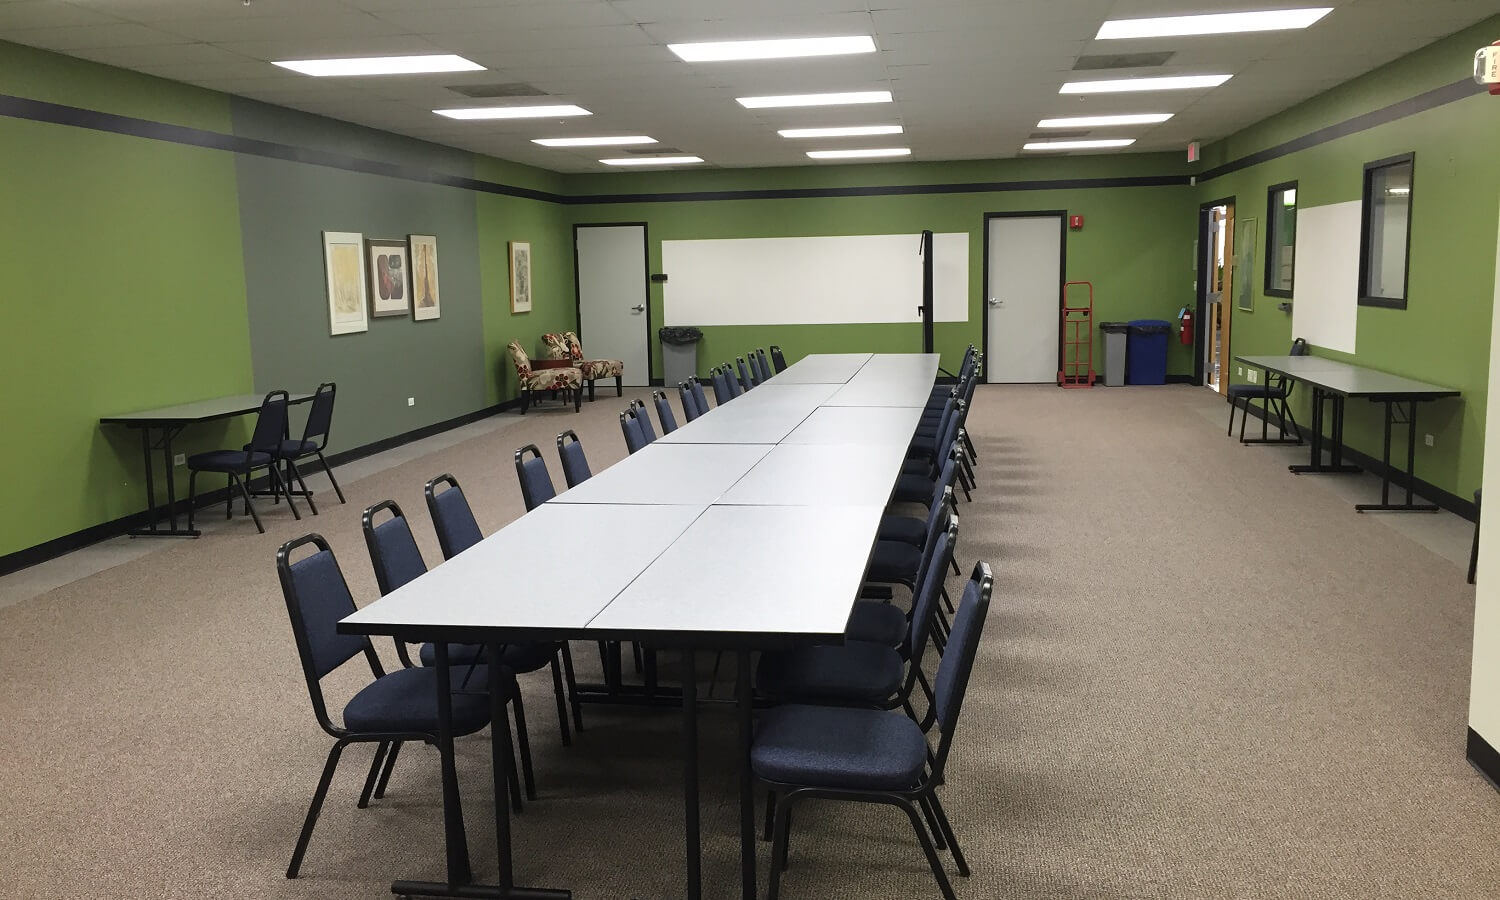 A mid-sized carpeted room with white boards and large alignment of tables and chairs.